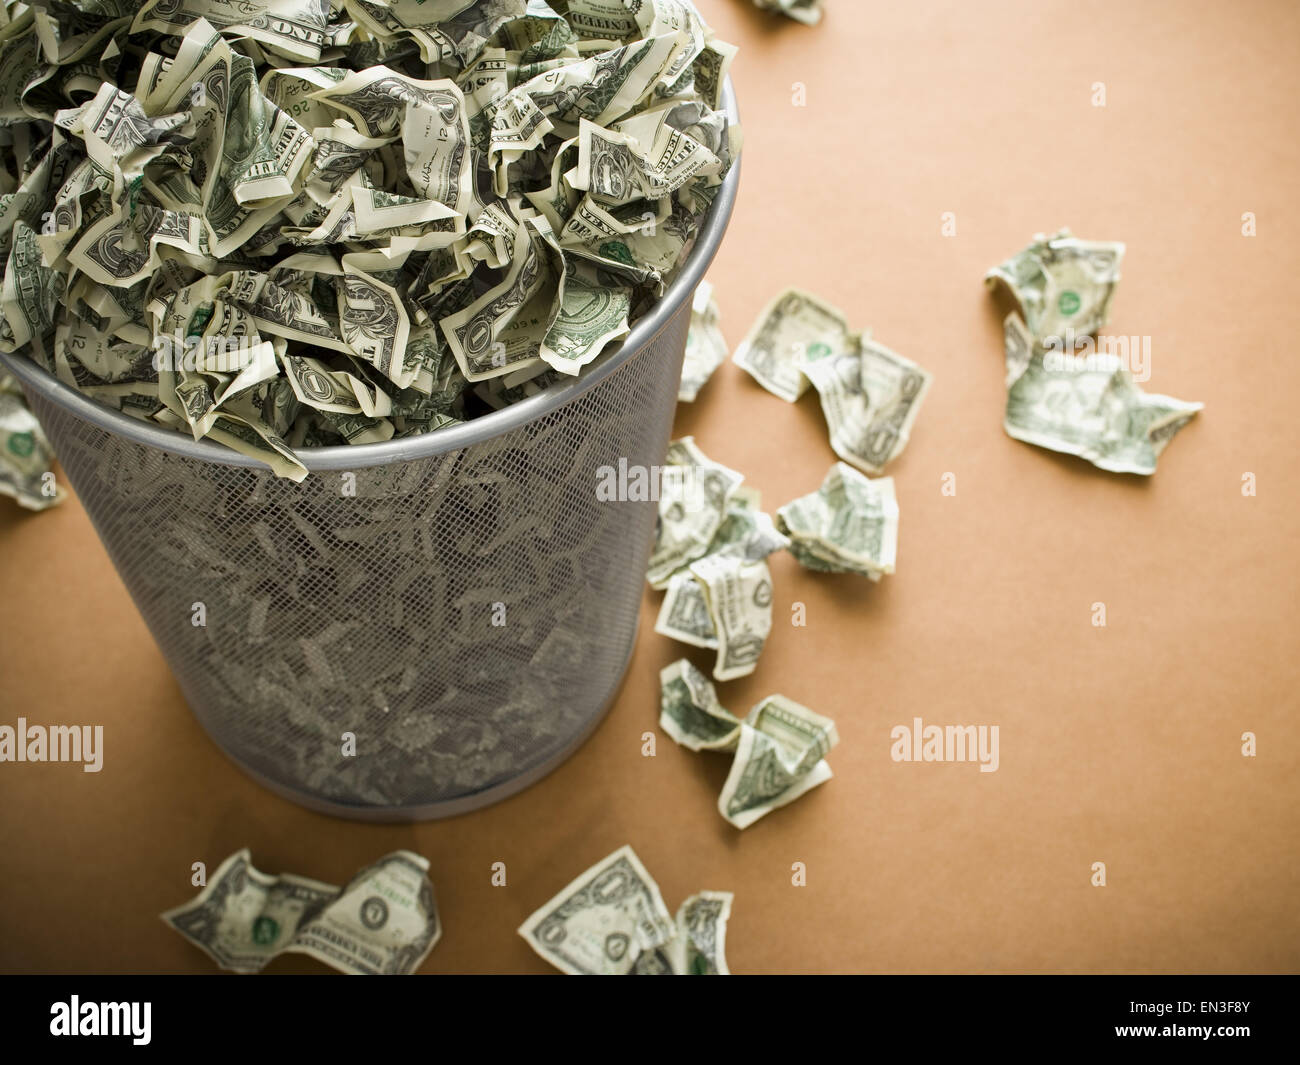 Waste paper basket with crumpled money Stock Photo